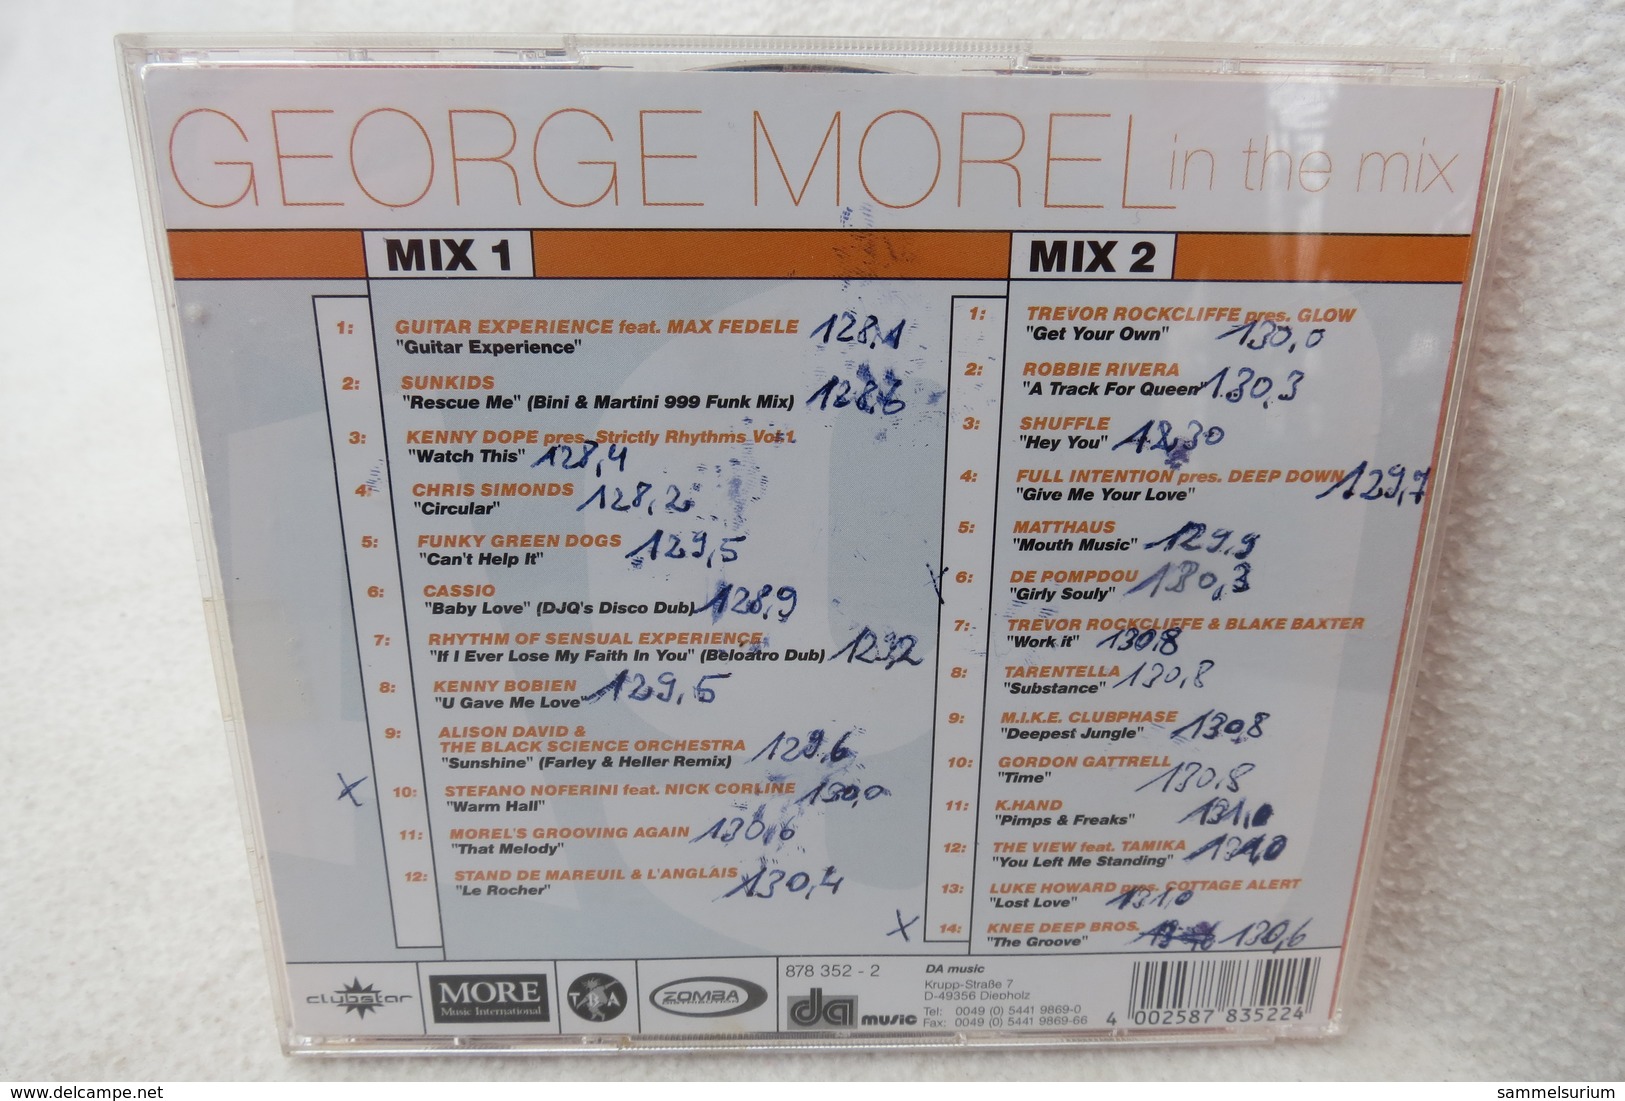 2 CDs "George Morel" In The Mix - Dance, Techno & House